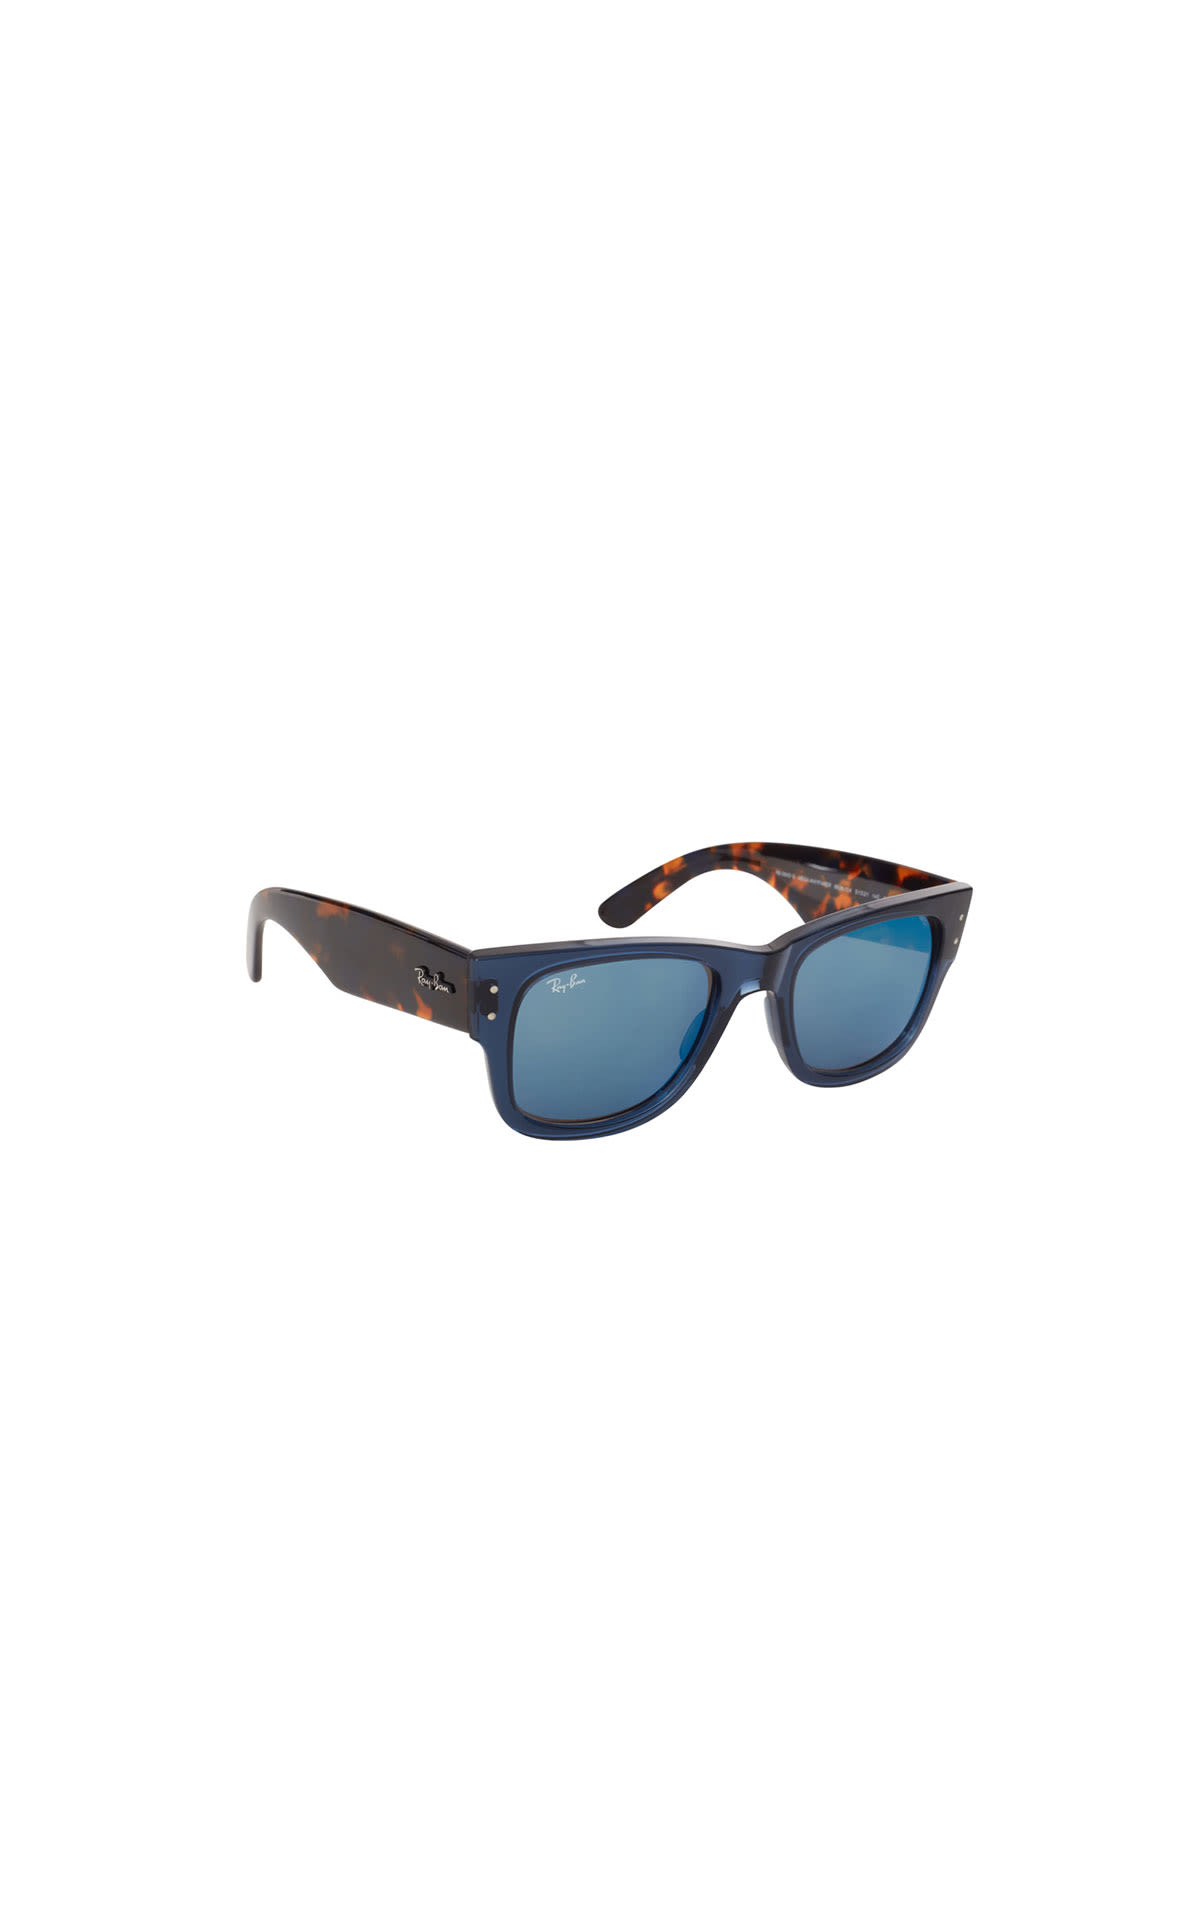 David Clulow Ray-ban newclubmaster from Bicester Village